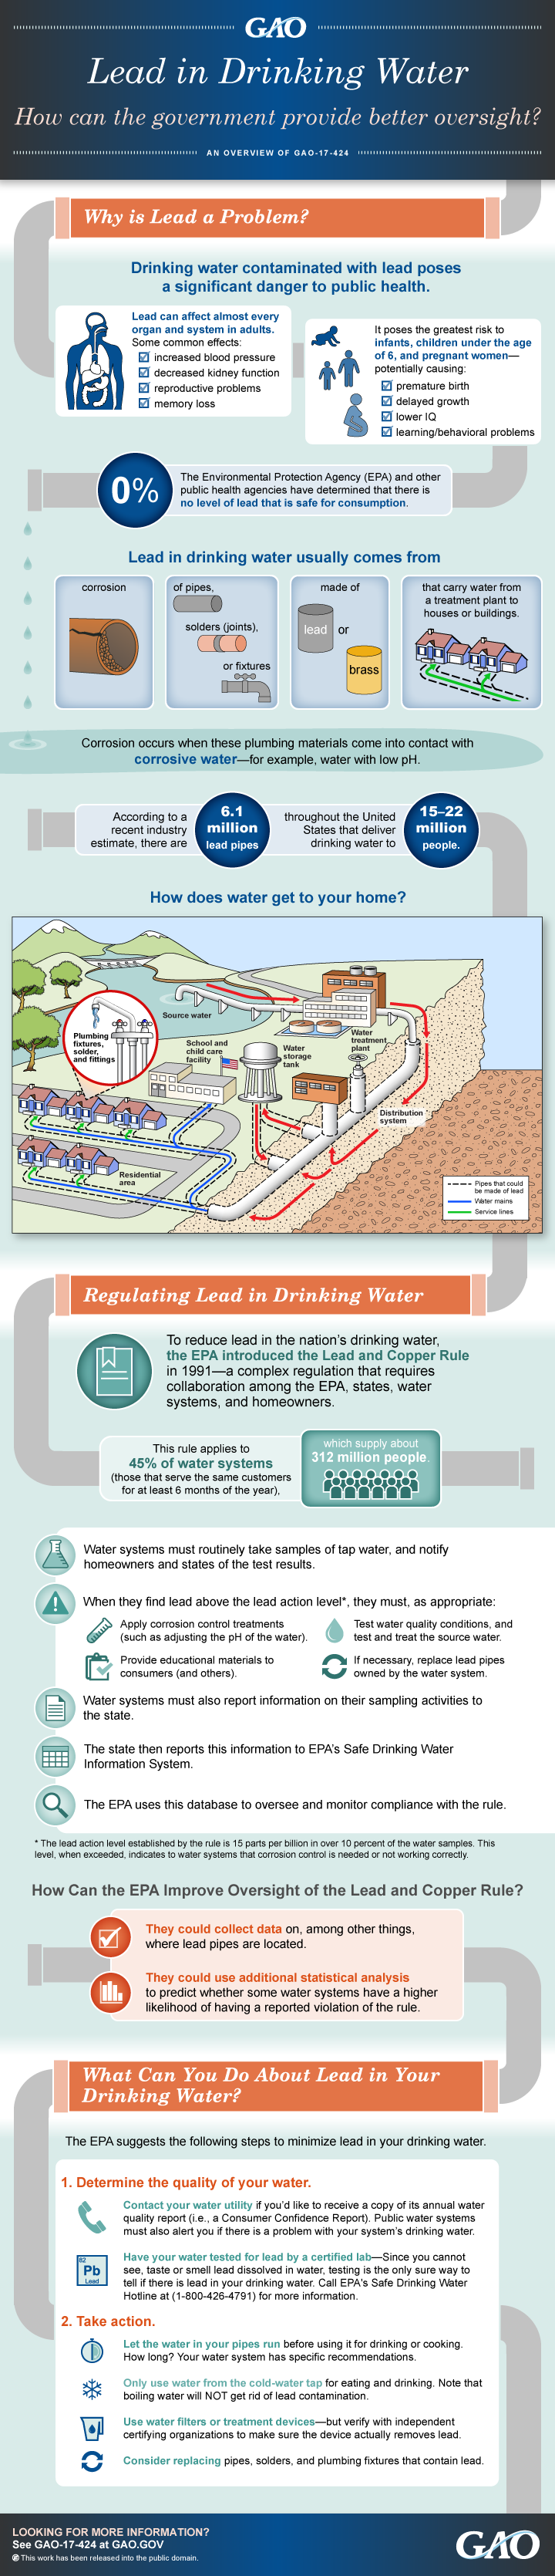 INFOGRAPHIC: Lead in Drinking Water